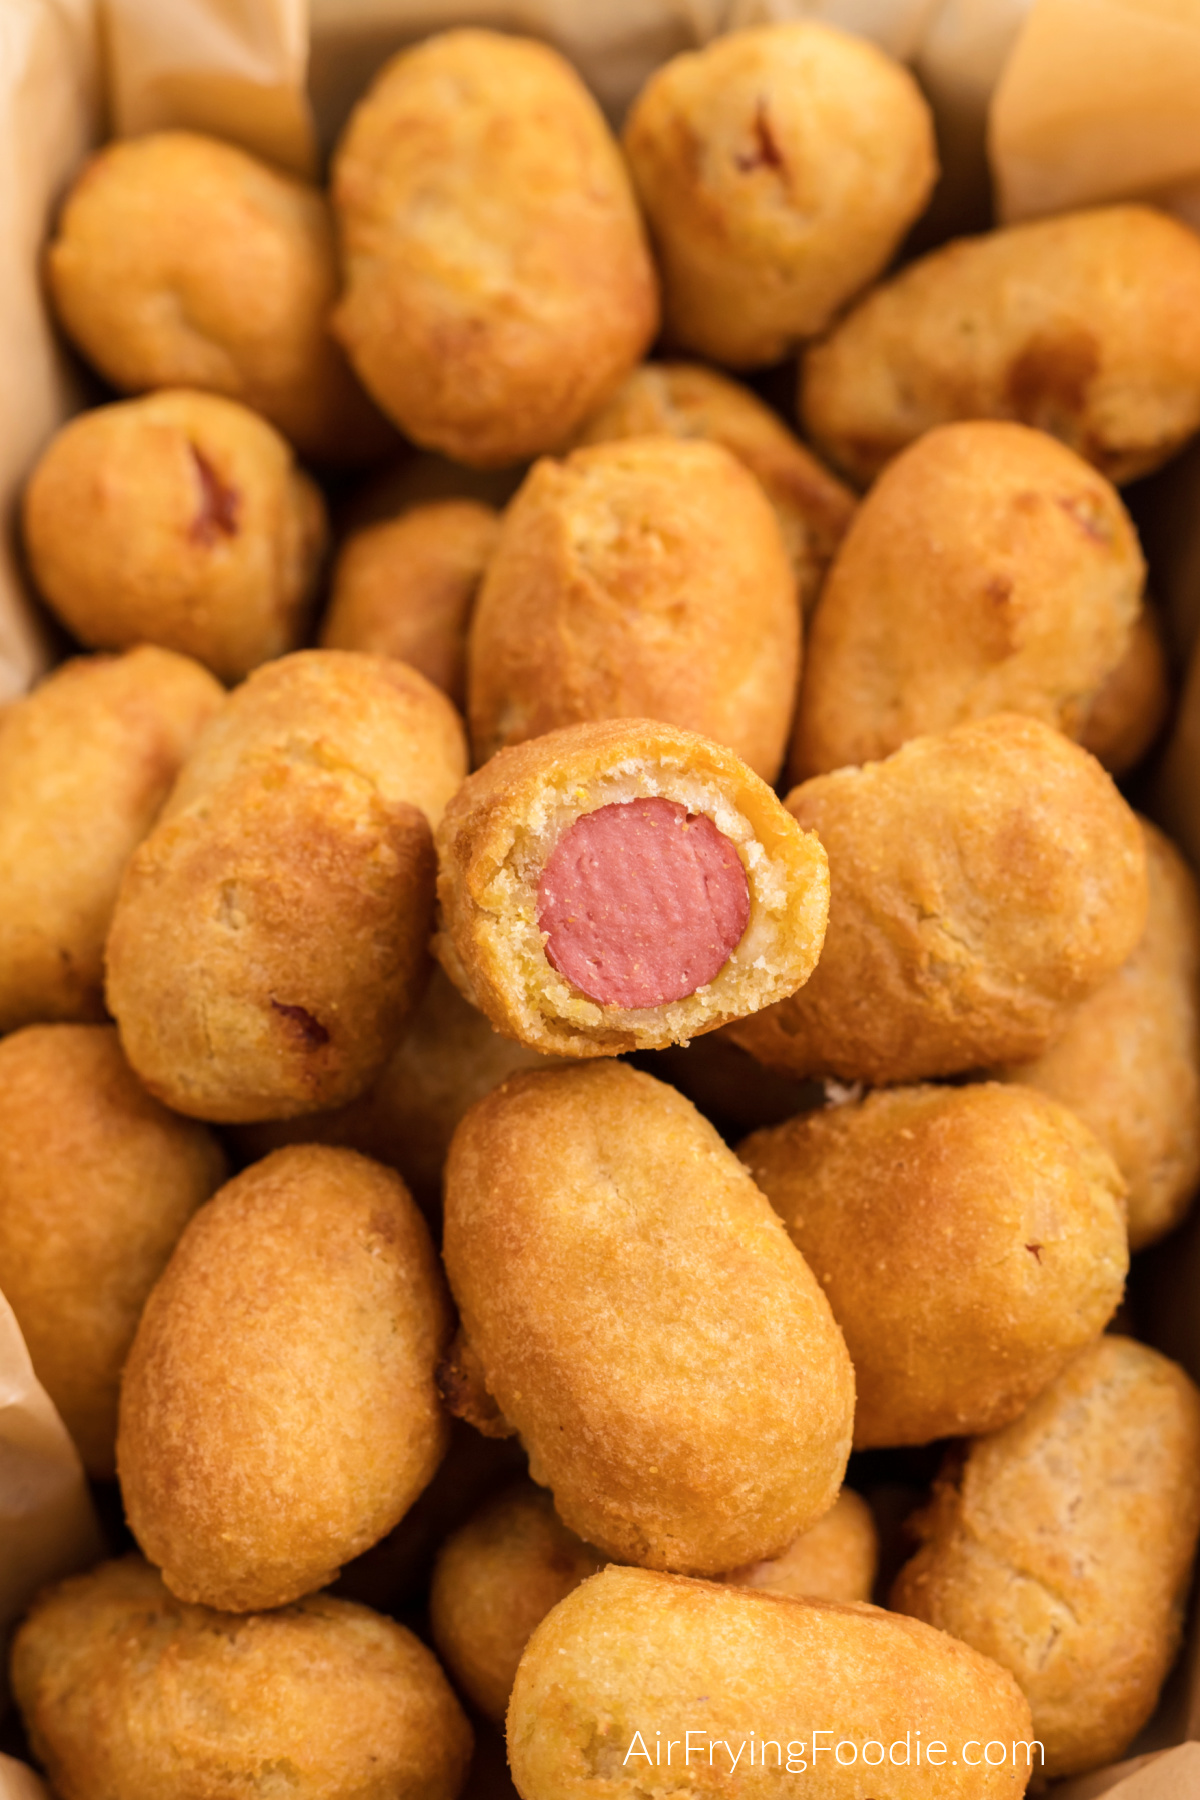 Basket of mini corn dogs made in the air fryer, with one corn dog cut in half.